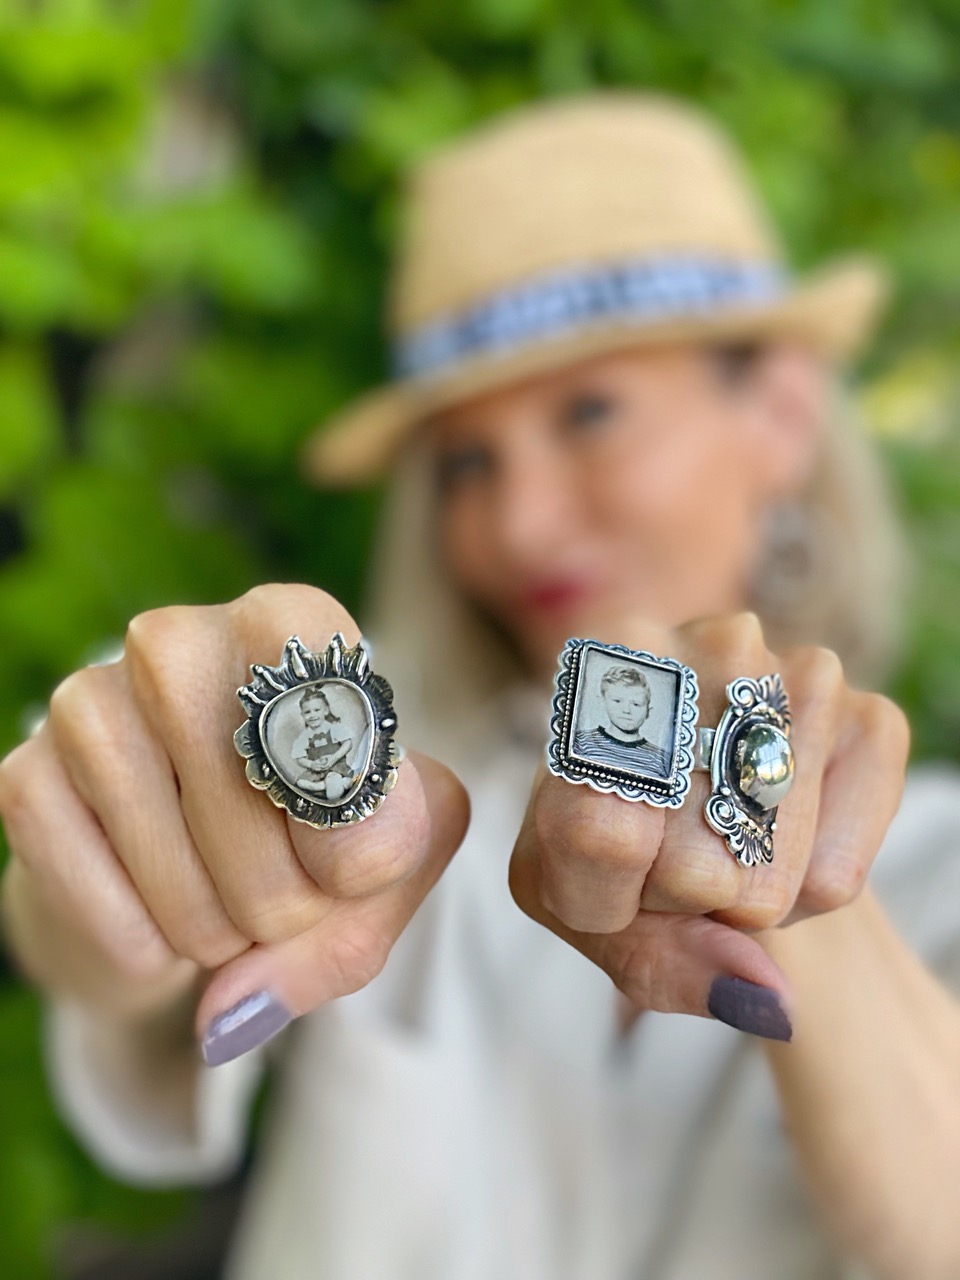 Lifestyle Influencer, Jamie Lewinger of More Than Turquoise, wearing custom rings from Shoofly 505 jewelry